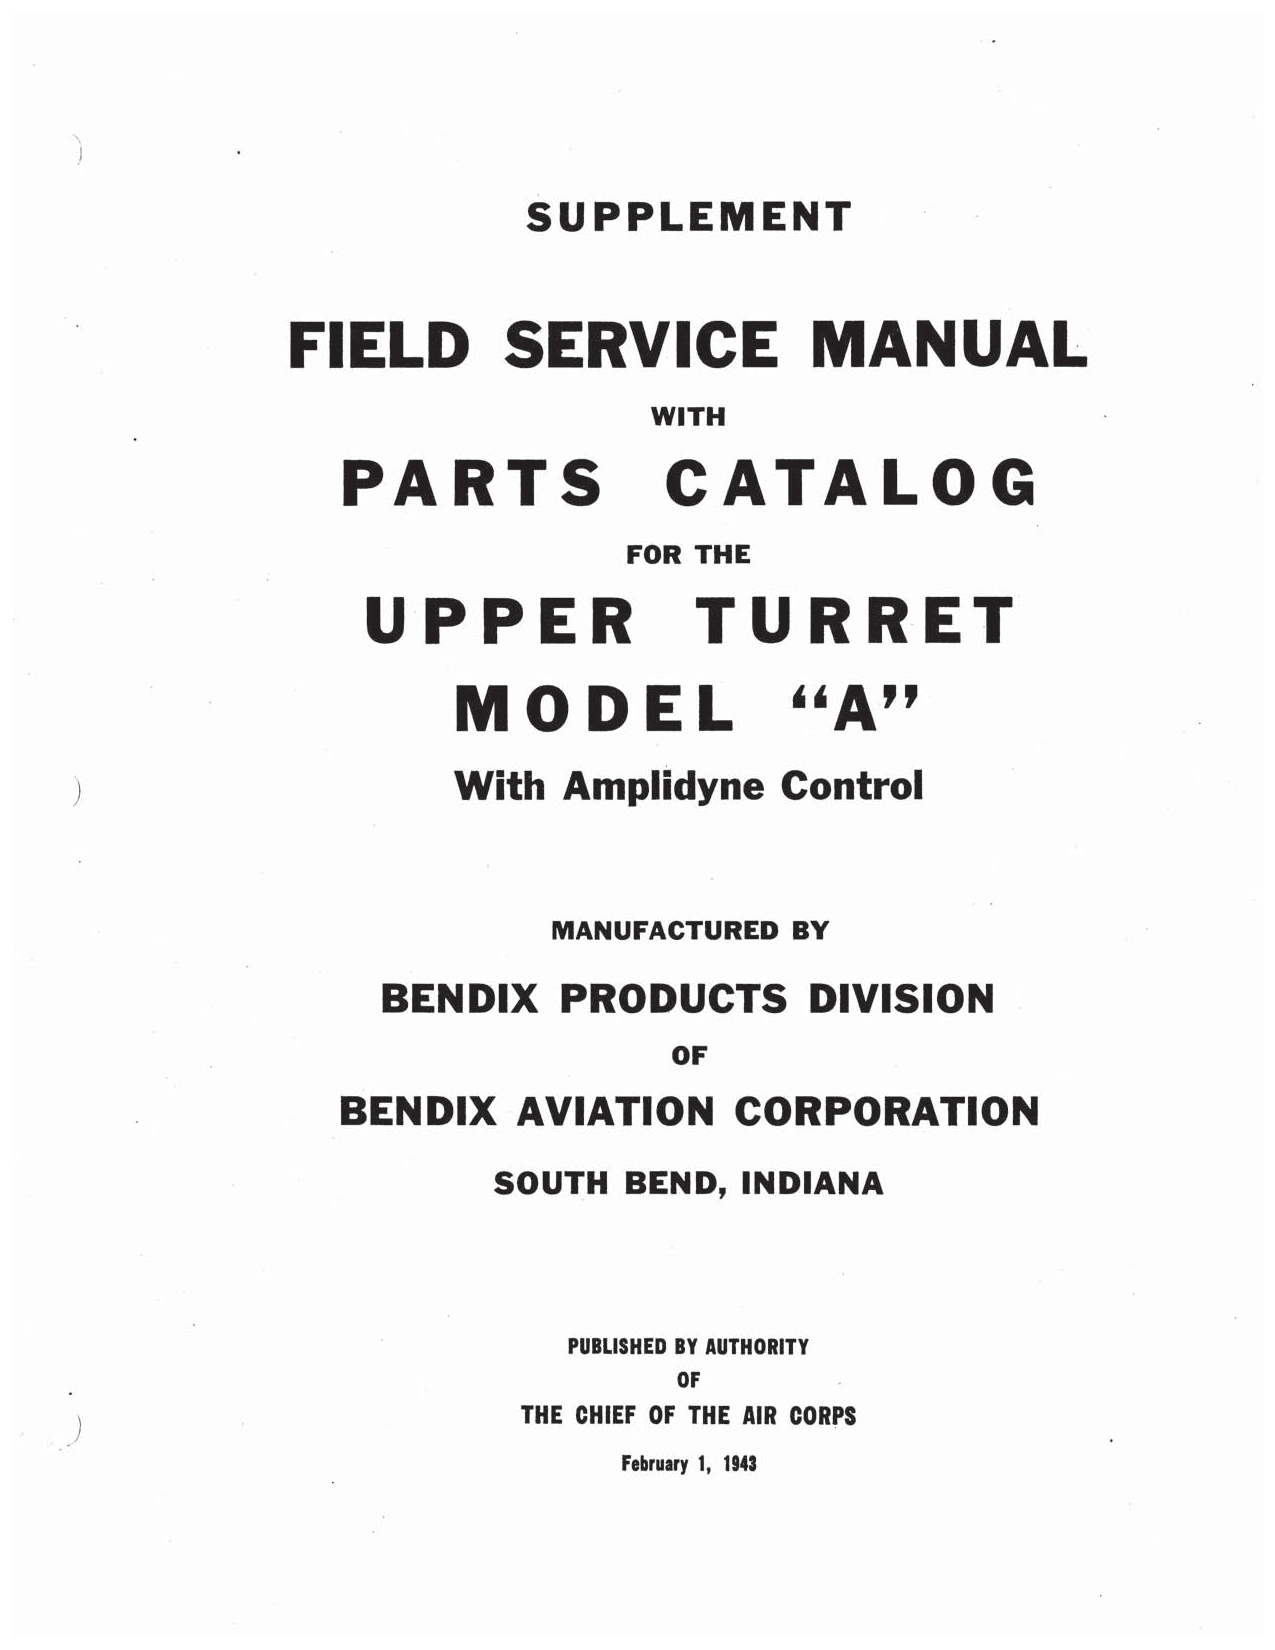 Sample page 1 from AirCorps Library document: Field Service Manual & Parts Catalog - Upper Turret Model 